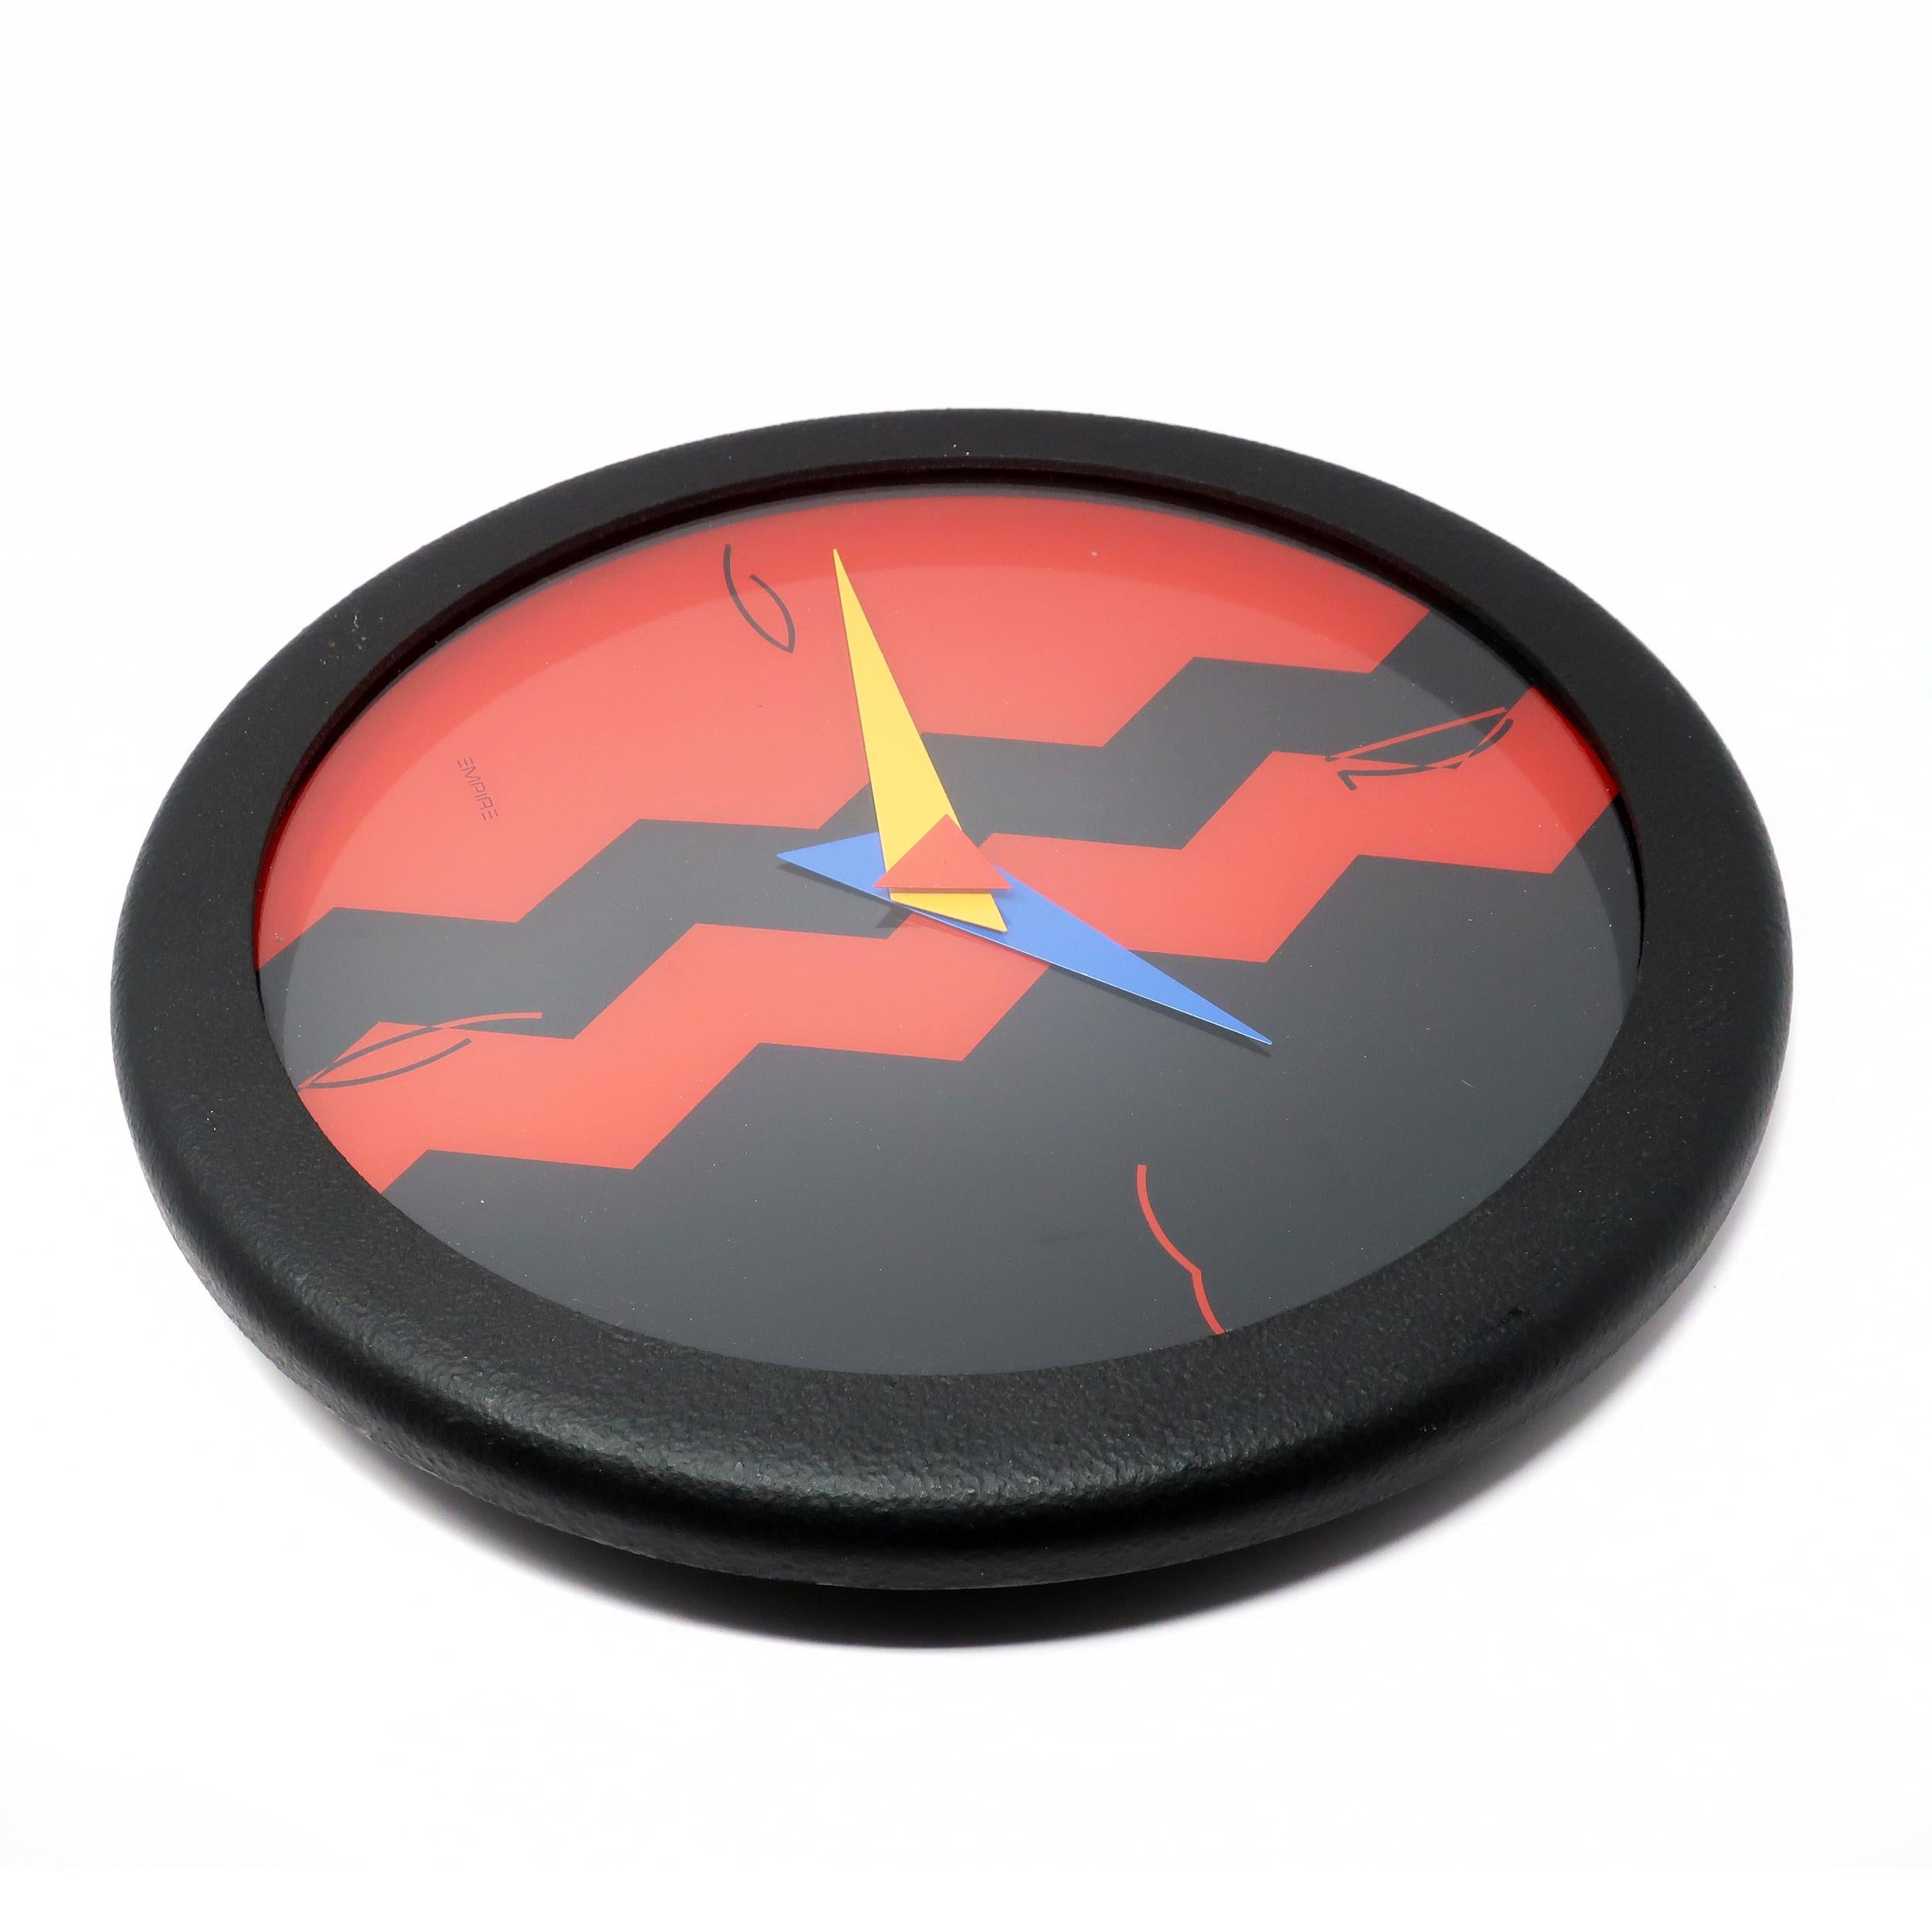 Post-Modern 1980s Postmodern Black Empire Art Products Clock For Sale